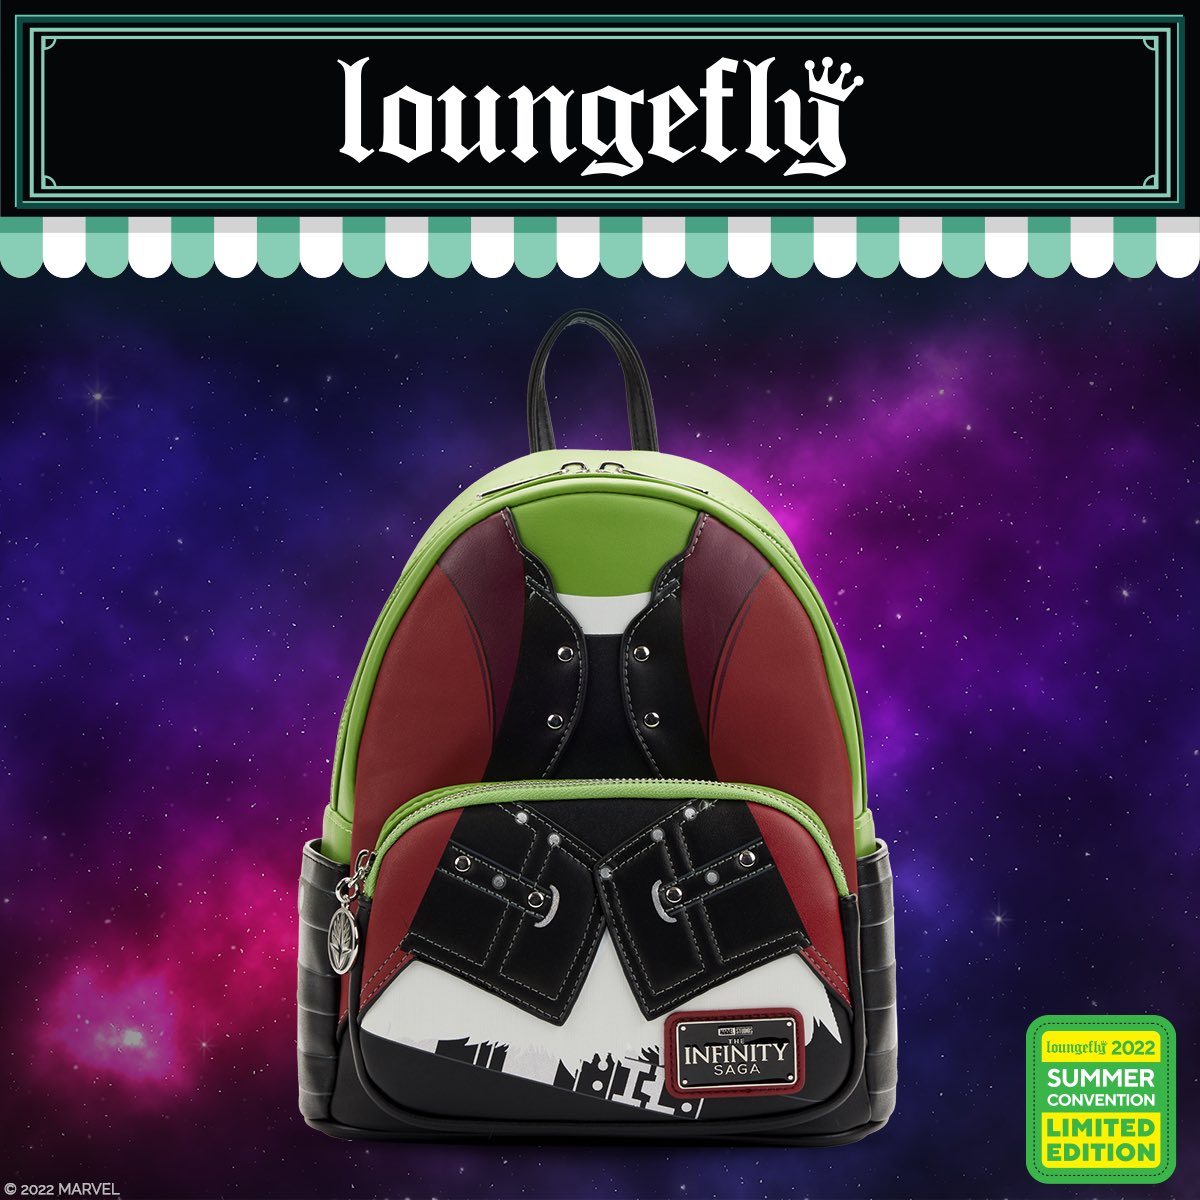 Loungefly at Comic Con 2022 - Exclusives and Reveals